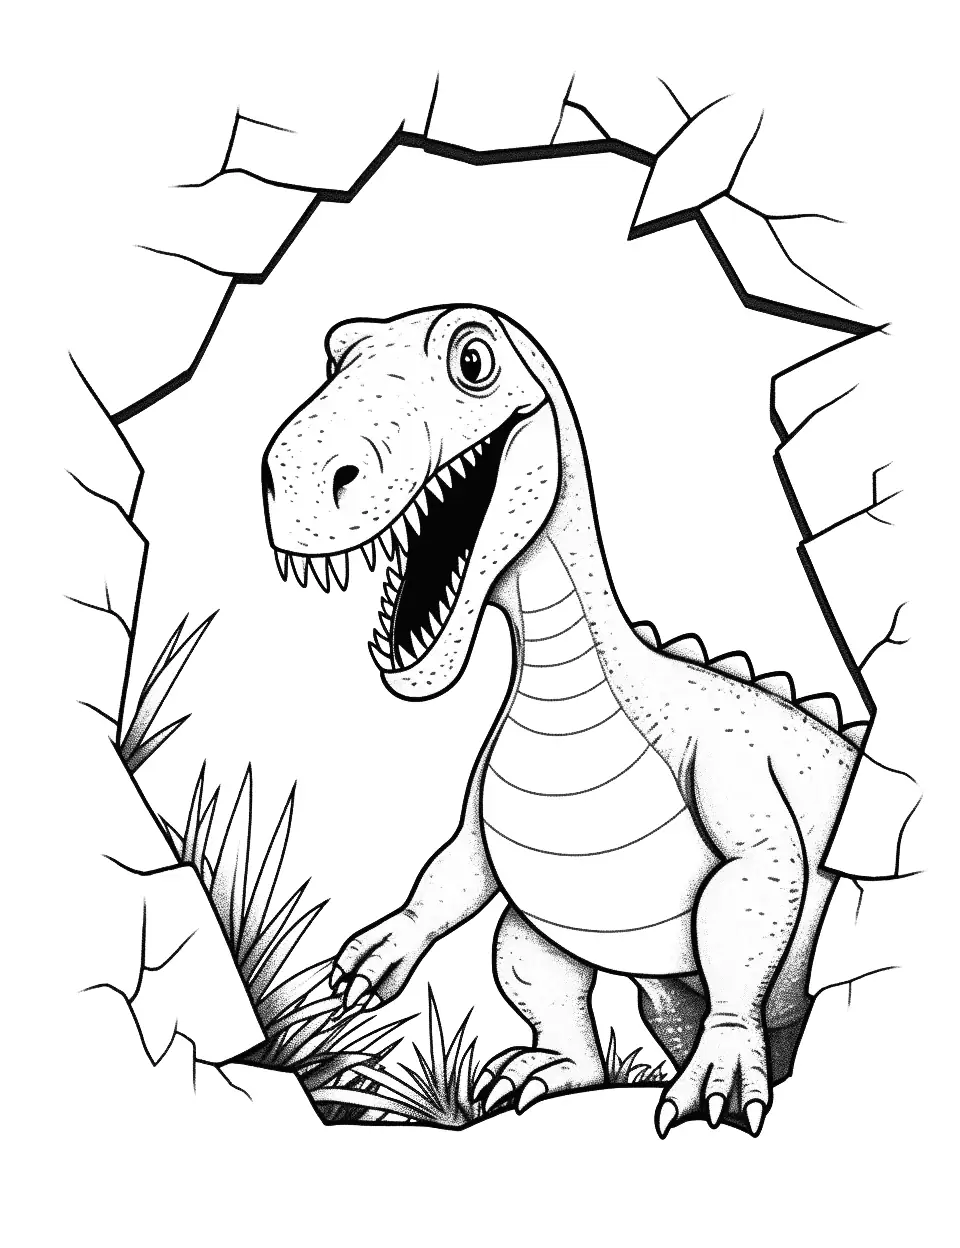 Indominus Rex Escape Dinosaur Coloring Page - The Indominus Rex breaking free from its enclosure.